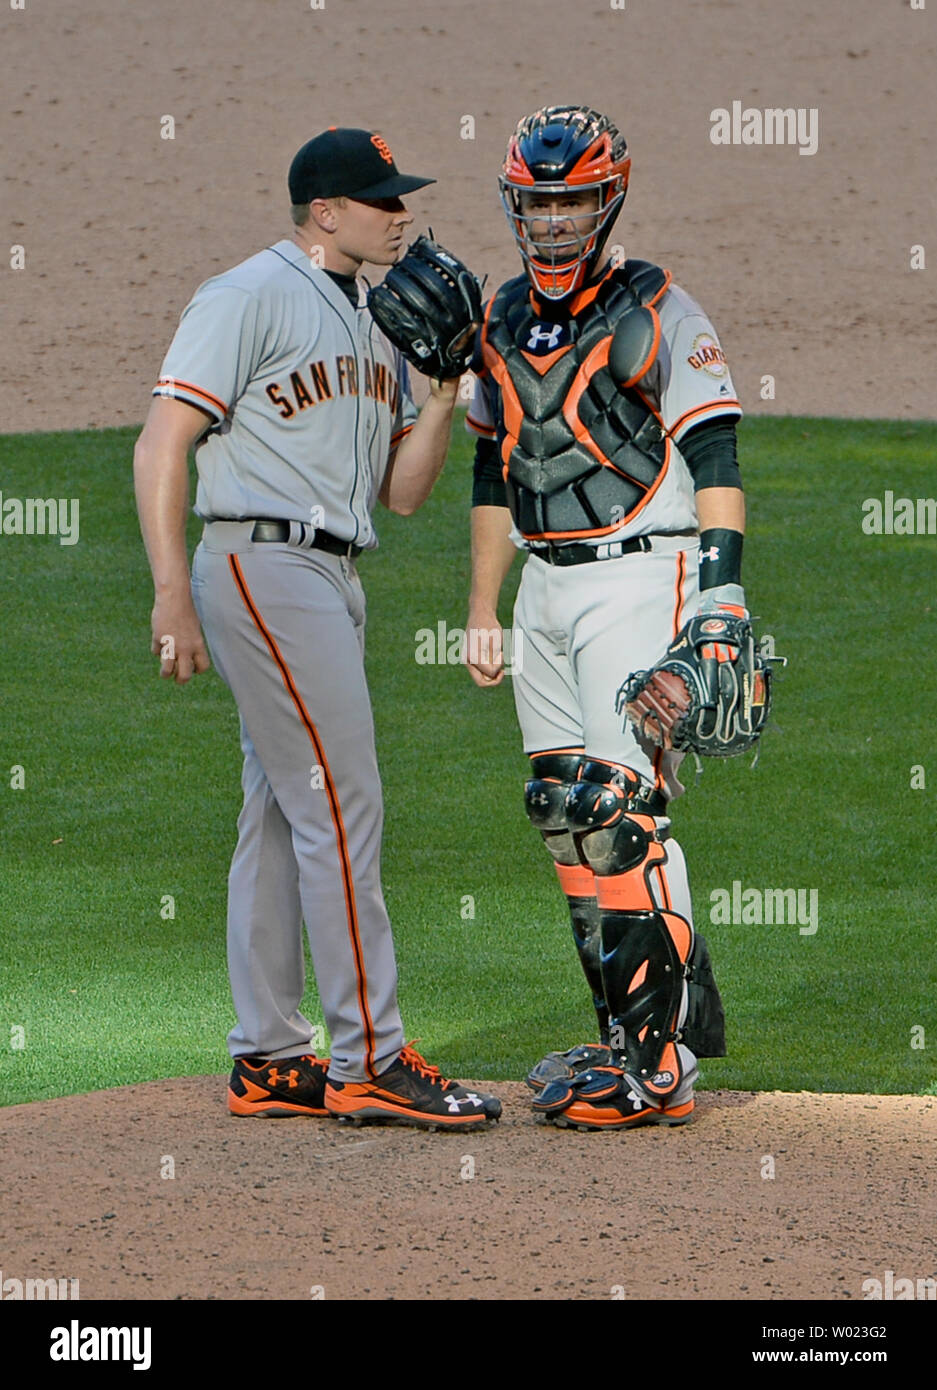 San Francisco Giants pitcher Mark Melancon (L) talks with catcher Buster Posey in the ninth inning during the Opening Day Game against the Arizona Diamondbacks at Chase Field in Phoenix, Arizona, April 2,2017. The Diamondbacks defeated the Giants 6-5. Photo by Art Foxall/UPI .... Stock Photo